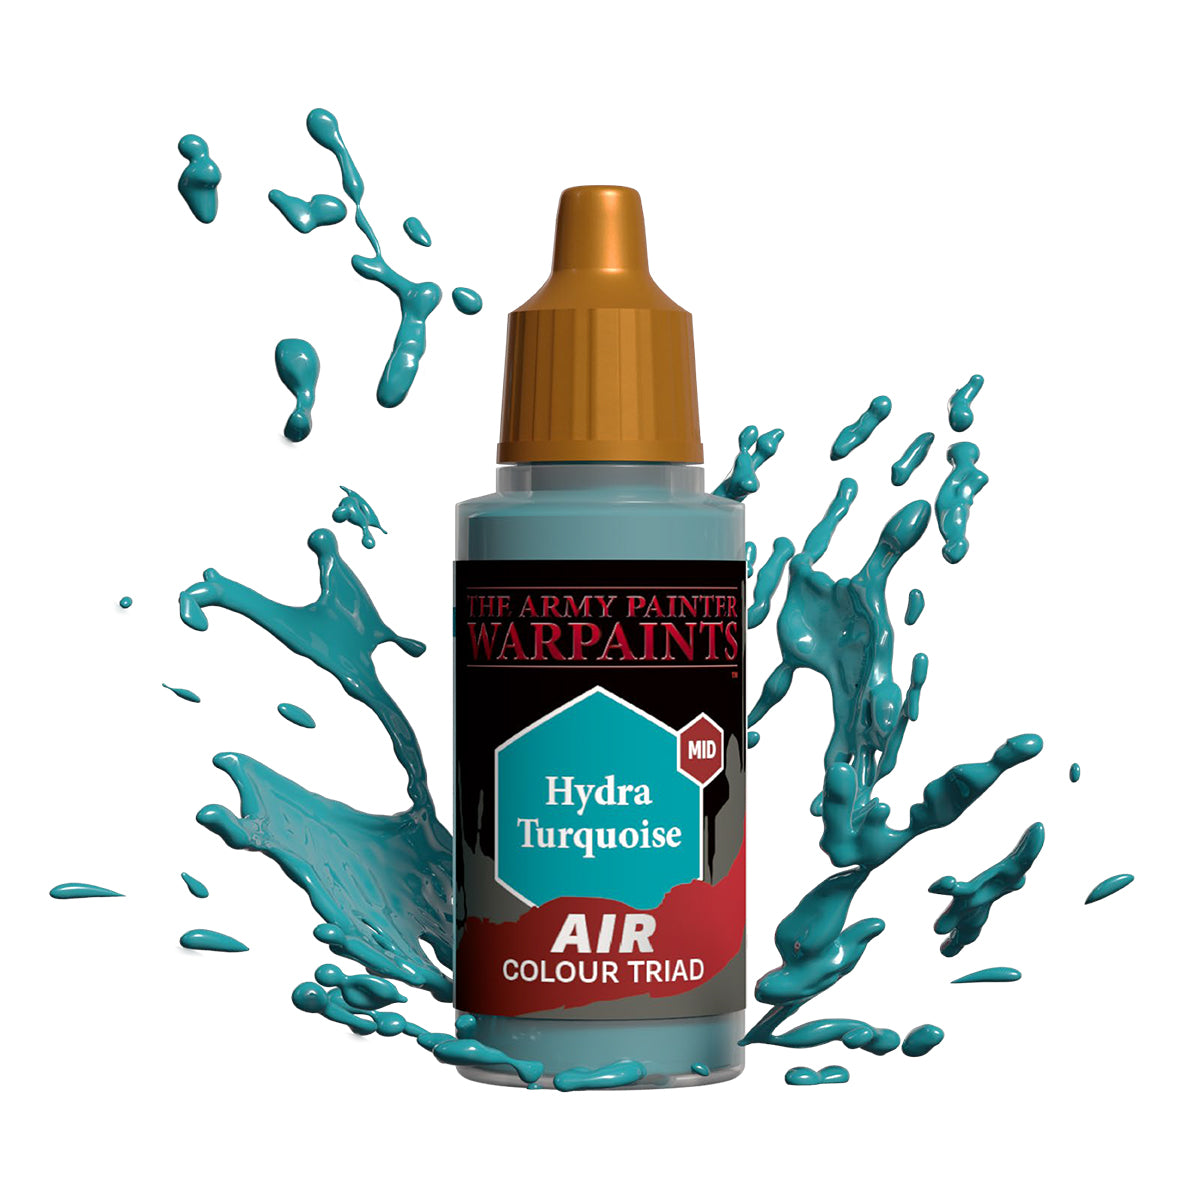 Army Painter Color Primer: Hydra Turquoise (400ml), Accessories